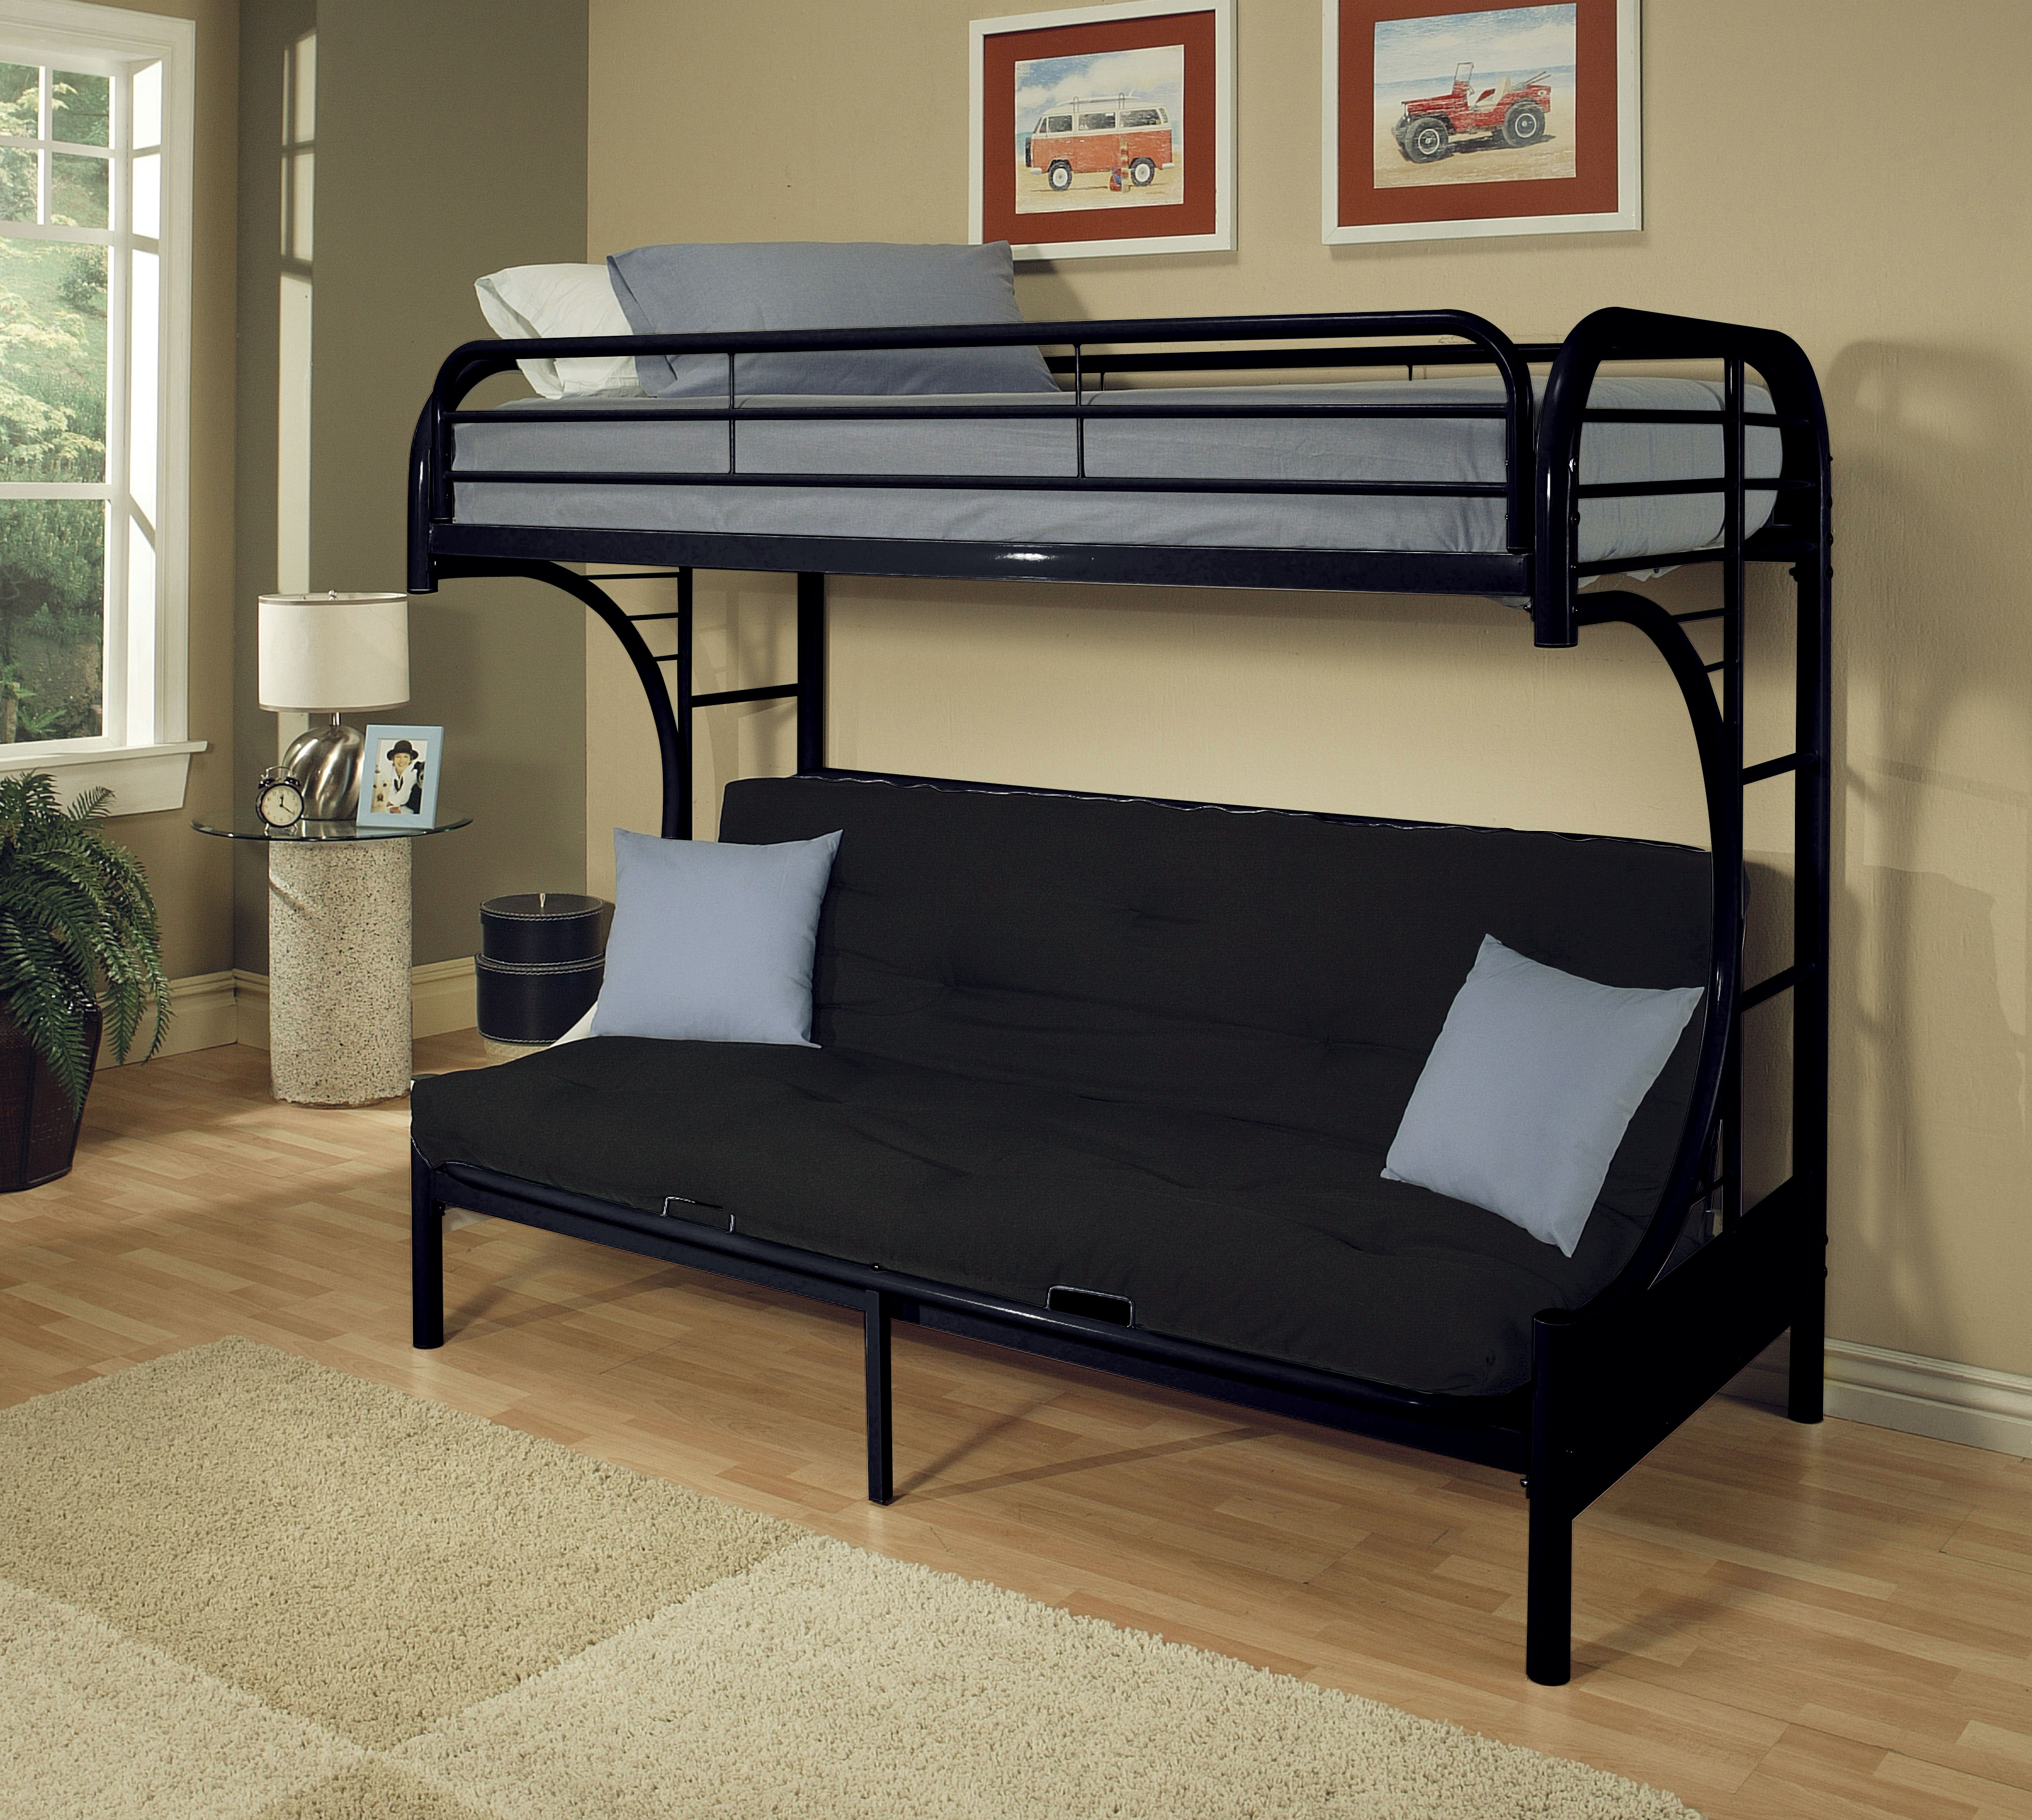 Acme Furniture Eclipse Twin over Full Futon Bunk Bed, Black - image 6 of 6